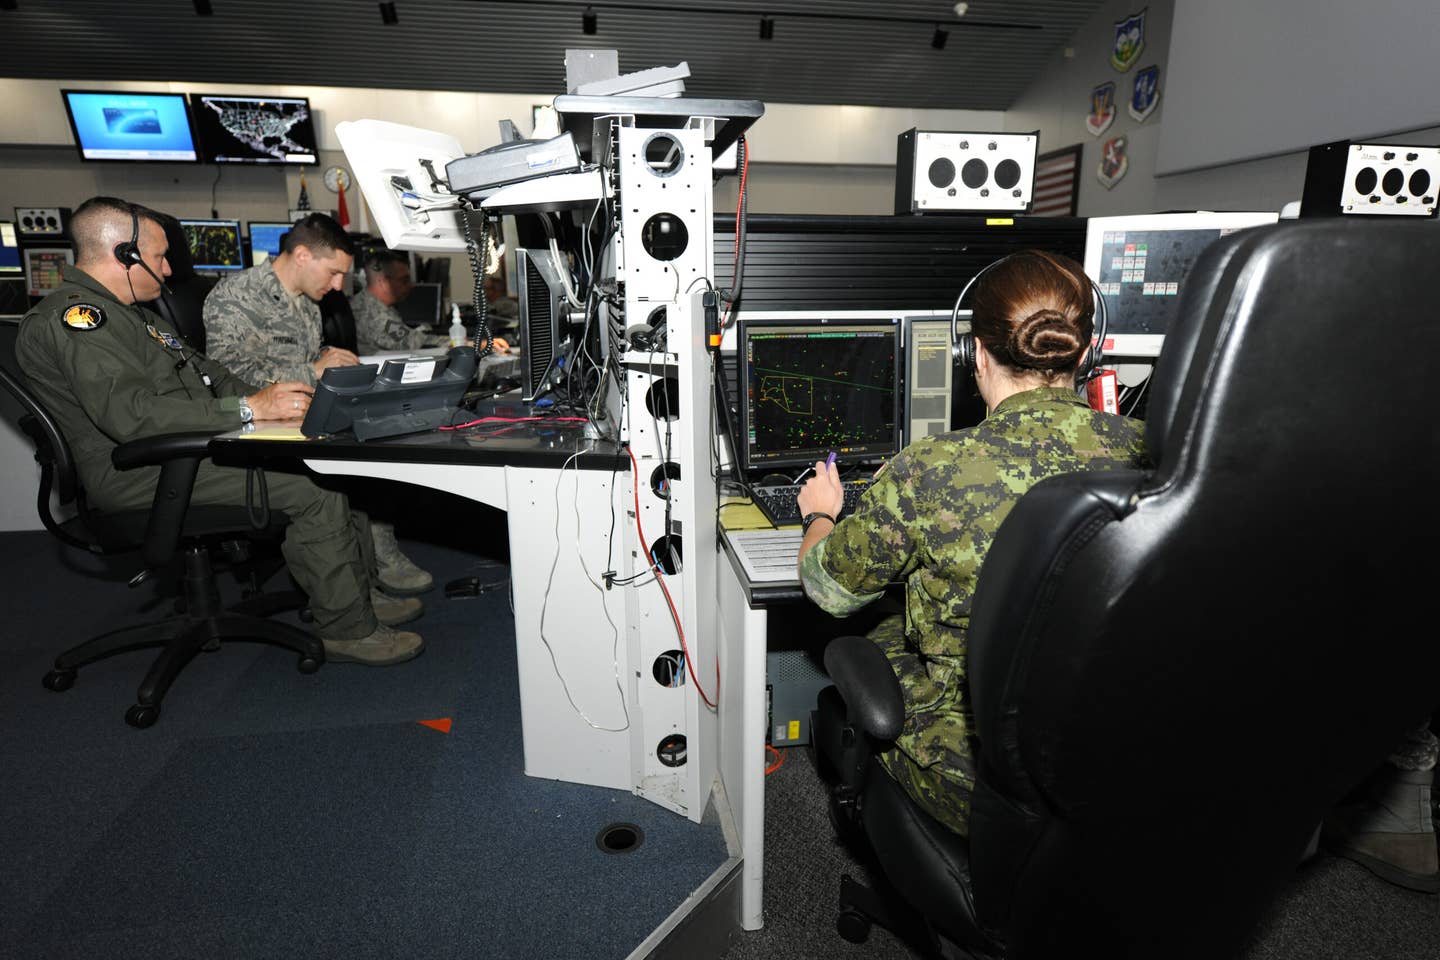 Eastern Air Defense Sector (EADS) Airmen conducting the 24/7 air defense mission. CBC2 will drastically enhance the interfaces and data operators leverage for defending North American airspace. (USAF)